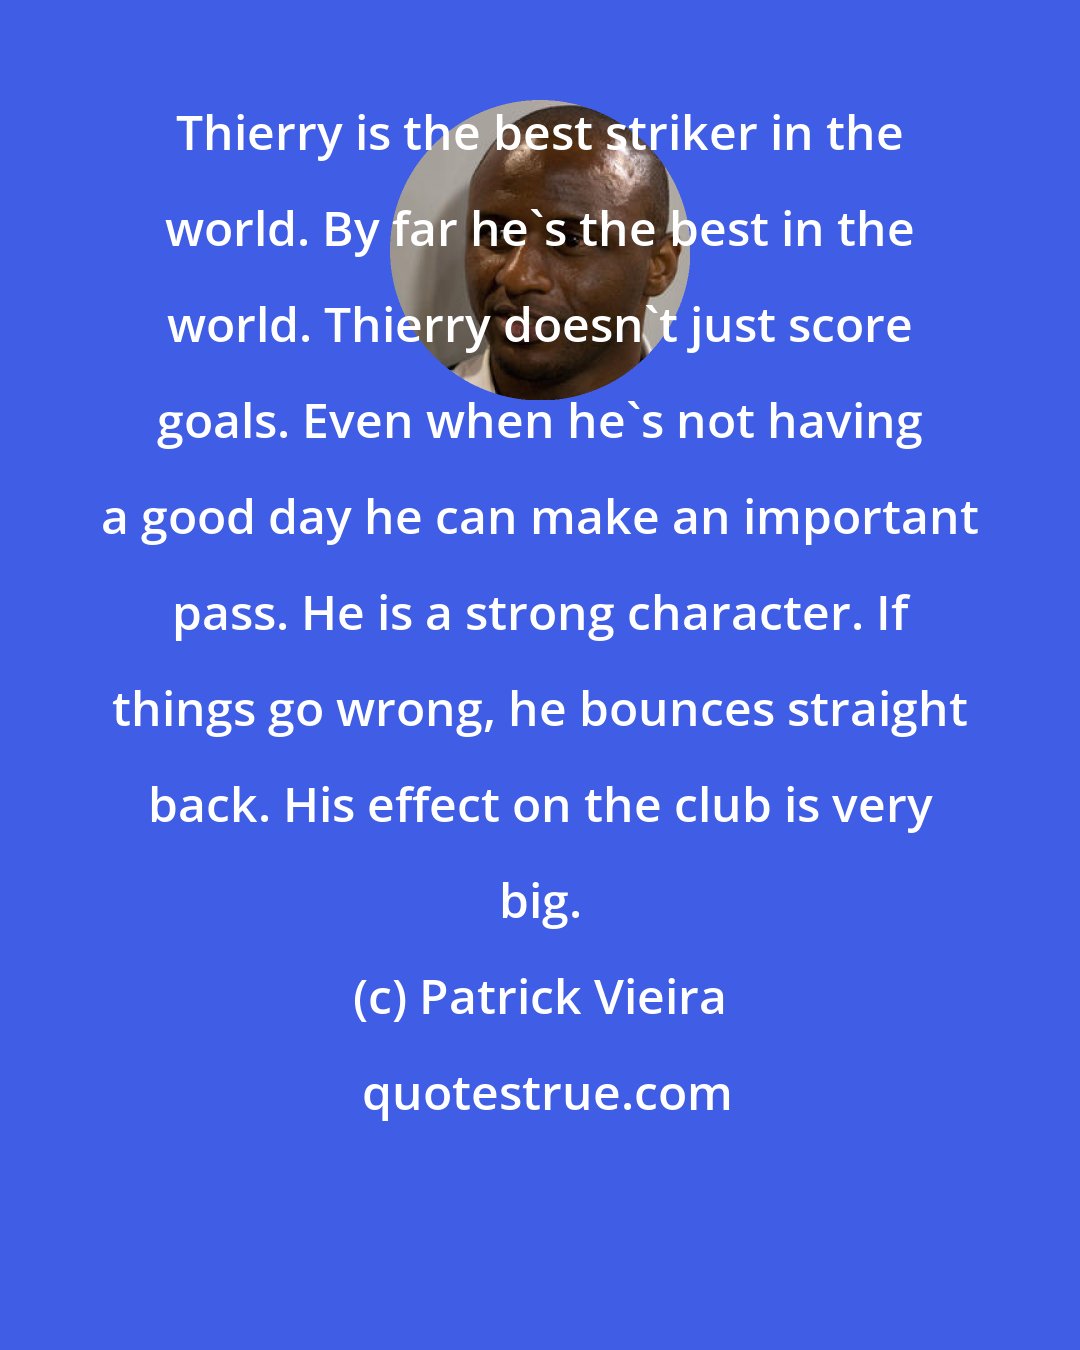 Patrick Vieira: Thierry is the best striker in the world. By far he's the best in the world. Thierry doesn't just score goals. Even when he's not having a good day he can make an important pass. He is a strong character. If things go wrong, he bounces straight back. His effect on the club is very big.